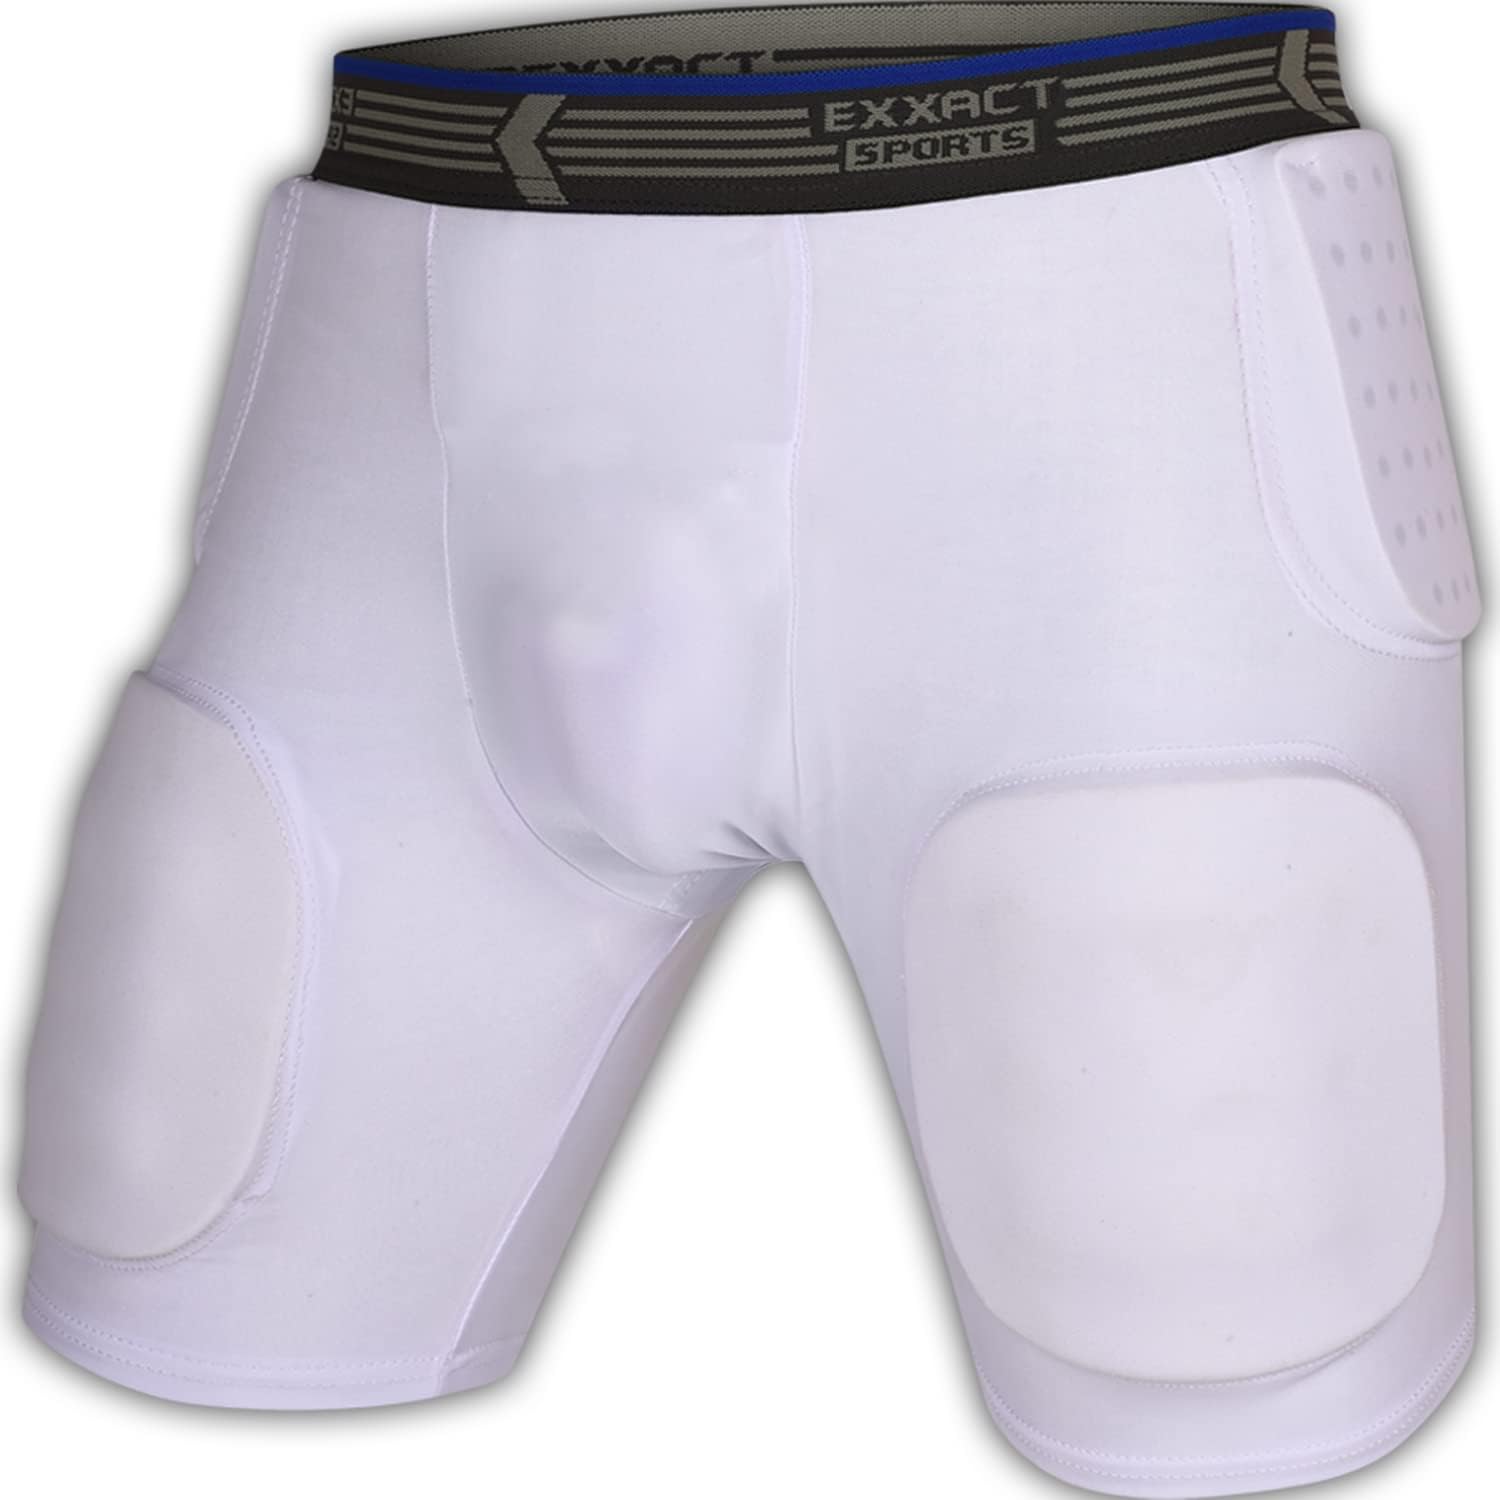 Zoombang Girdle w/ Hip and Tailbone Protection Adult